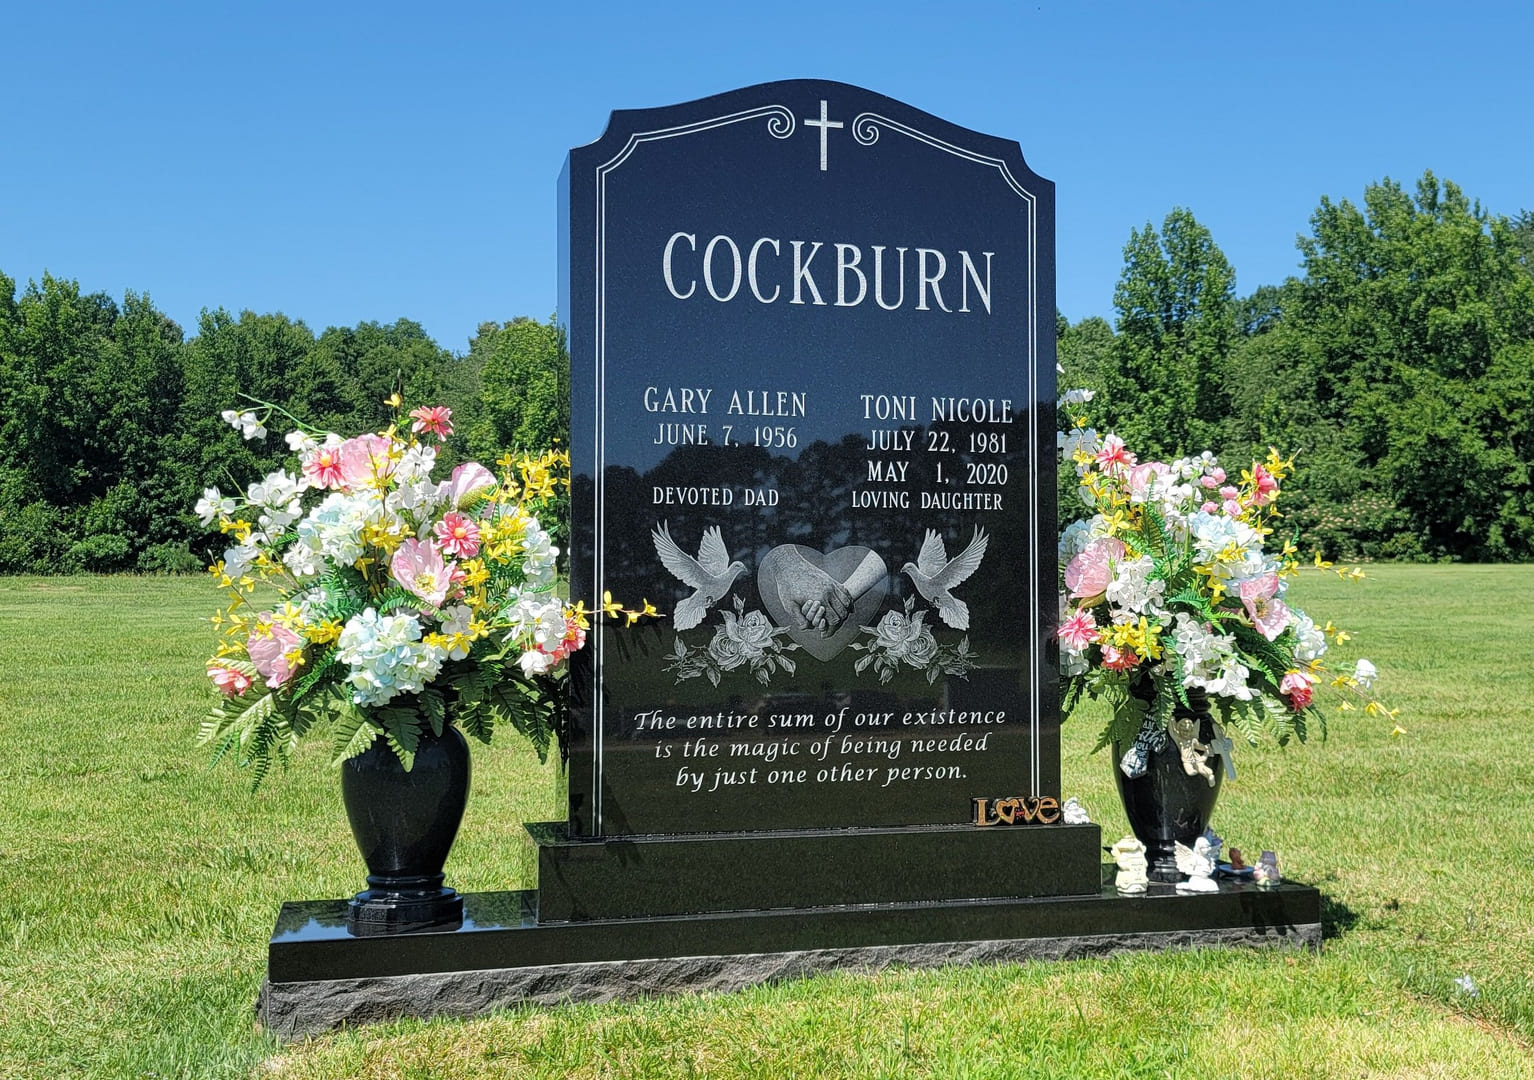 A memorial slab for Gary Allen and Toni Nicole